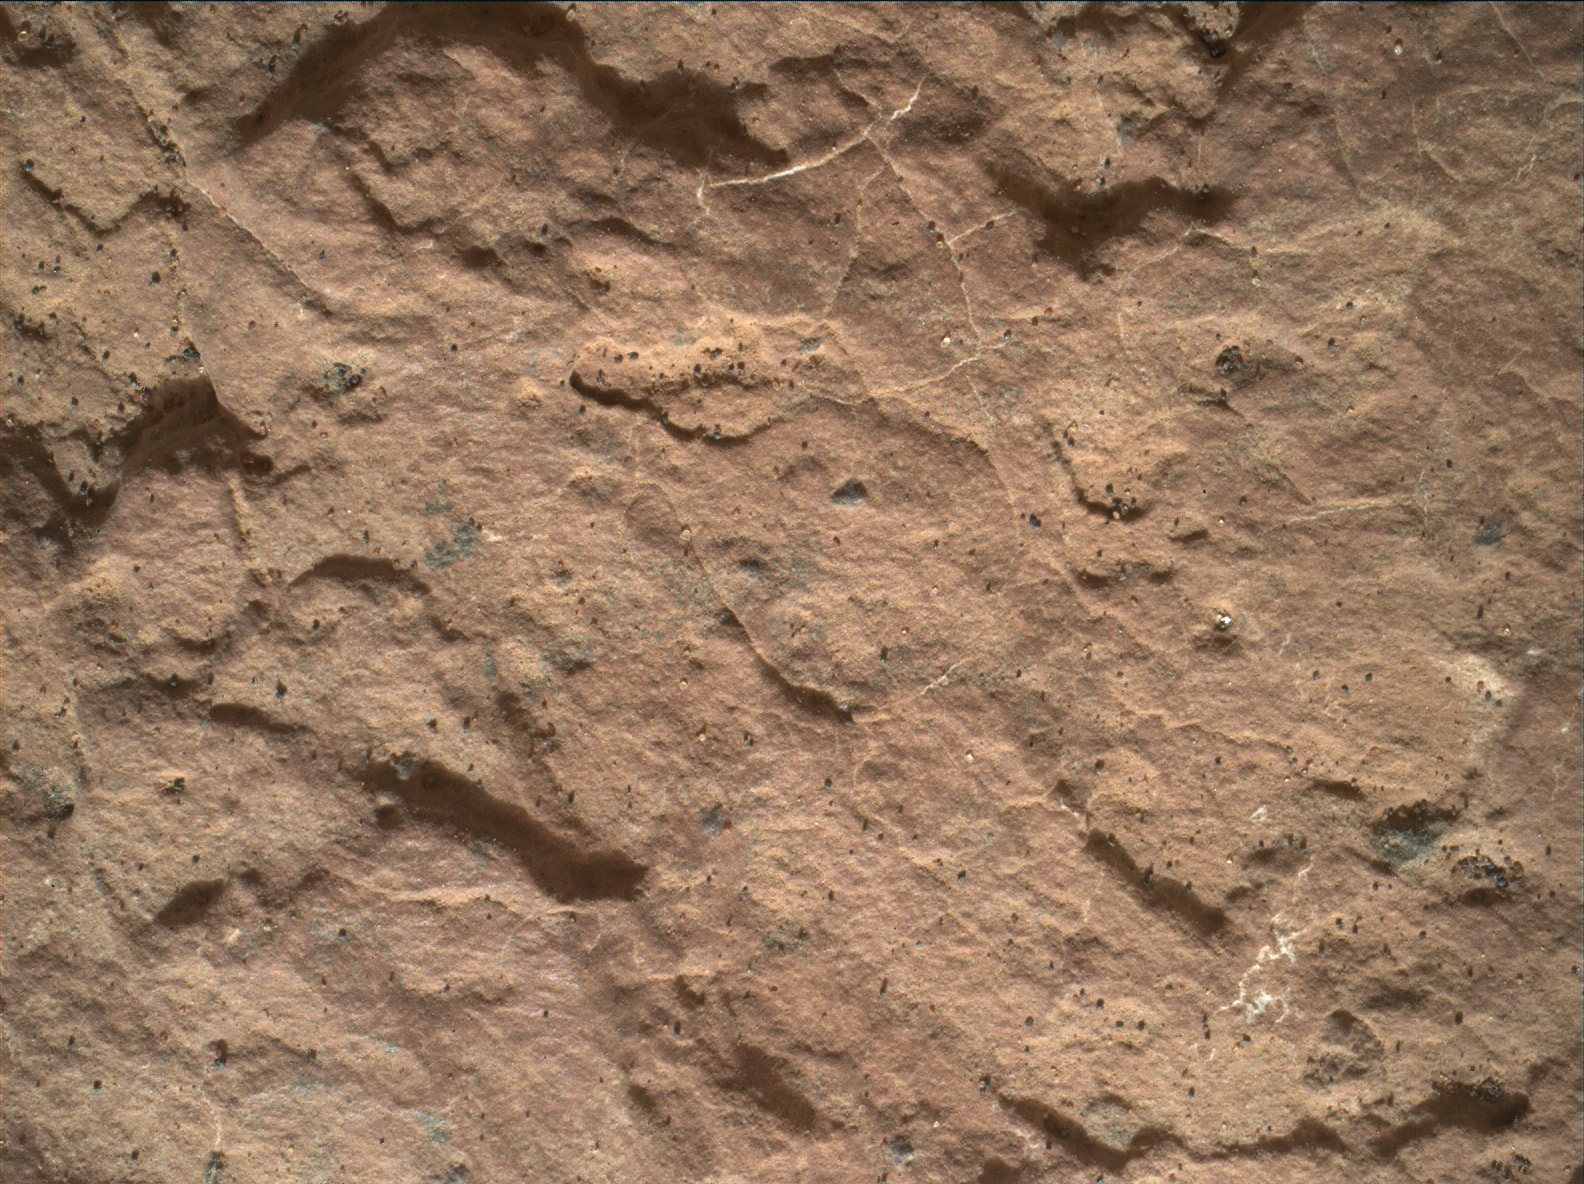 Nasa's Mars rover Curiosity acquired this image using its Mars Hand Lens Imager (MAHLI) on Sol 1601